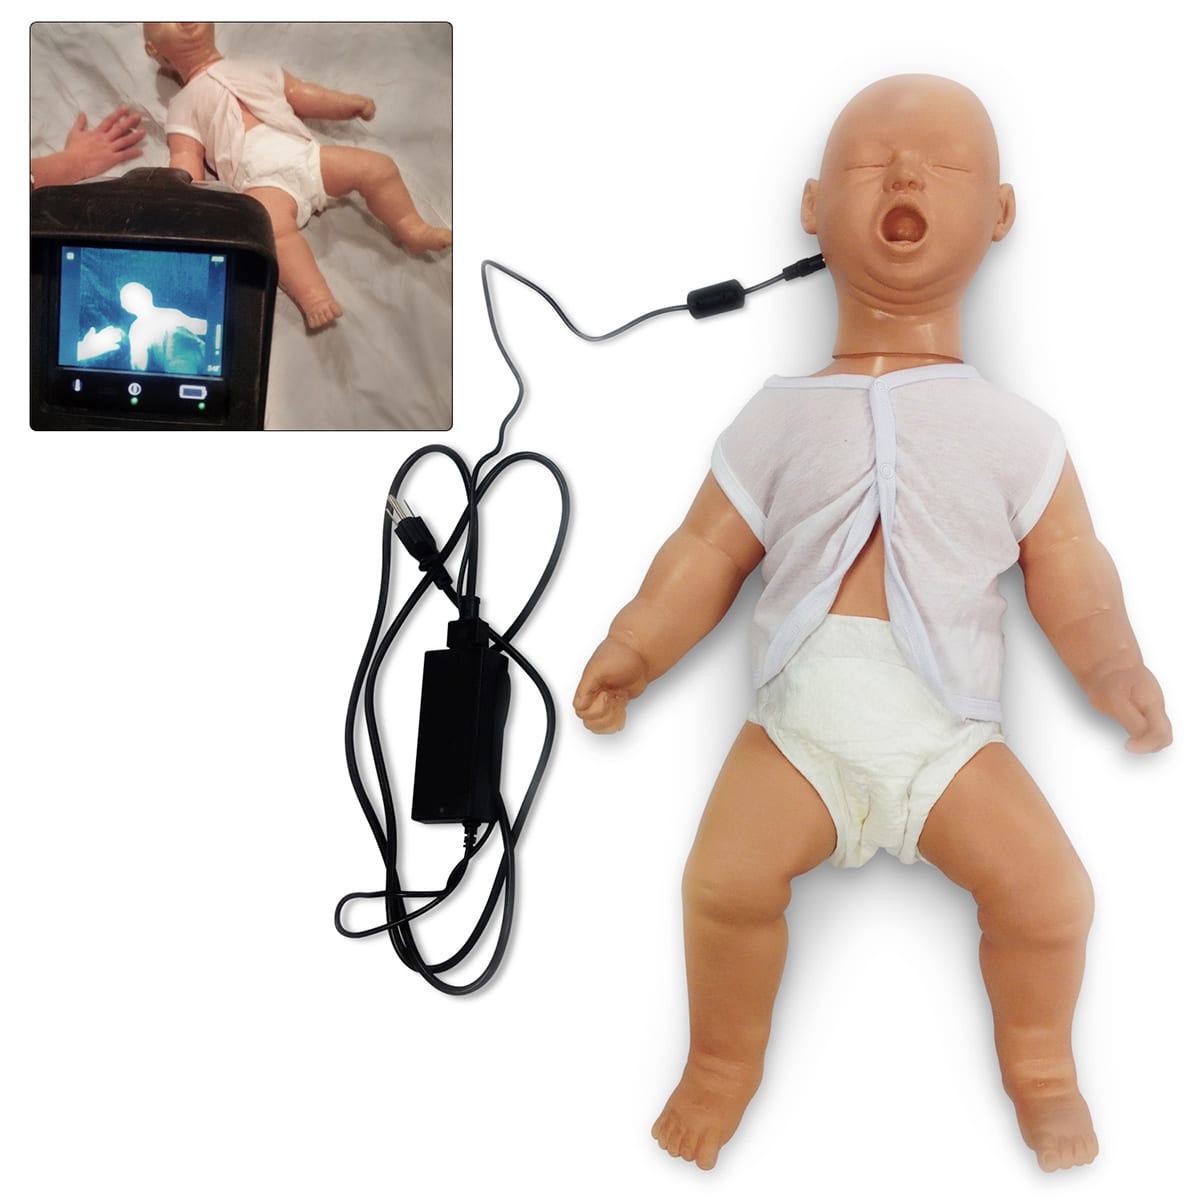 thermal-imaging-rescue-baby-1277